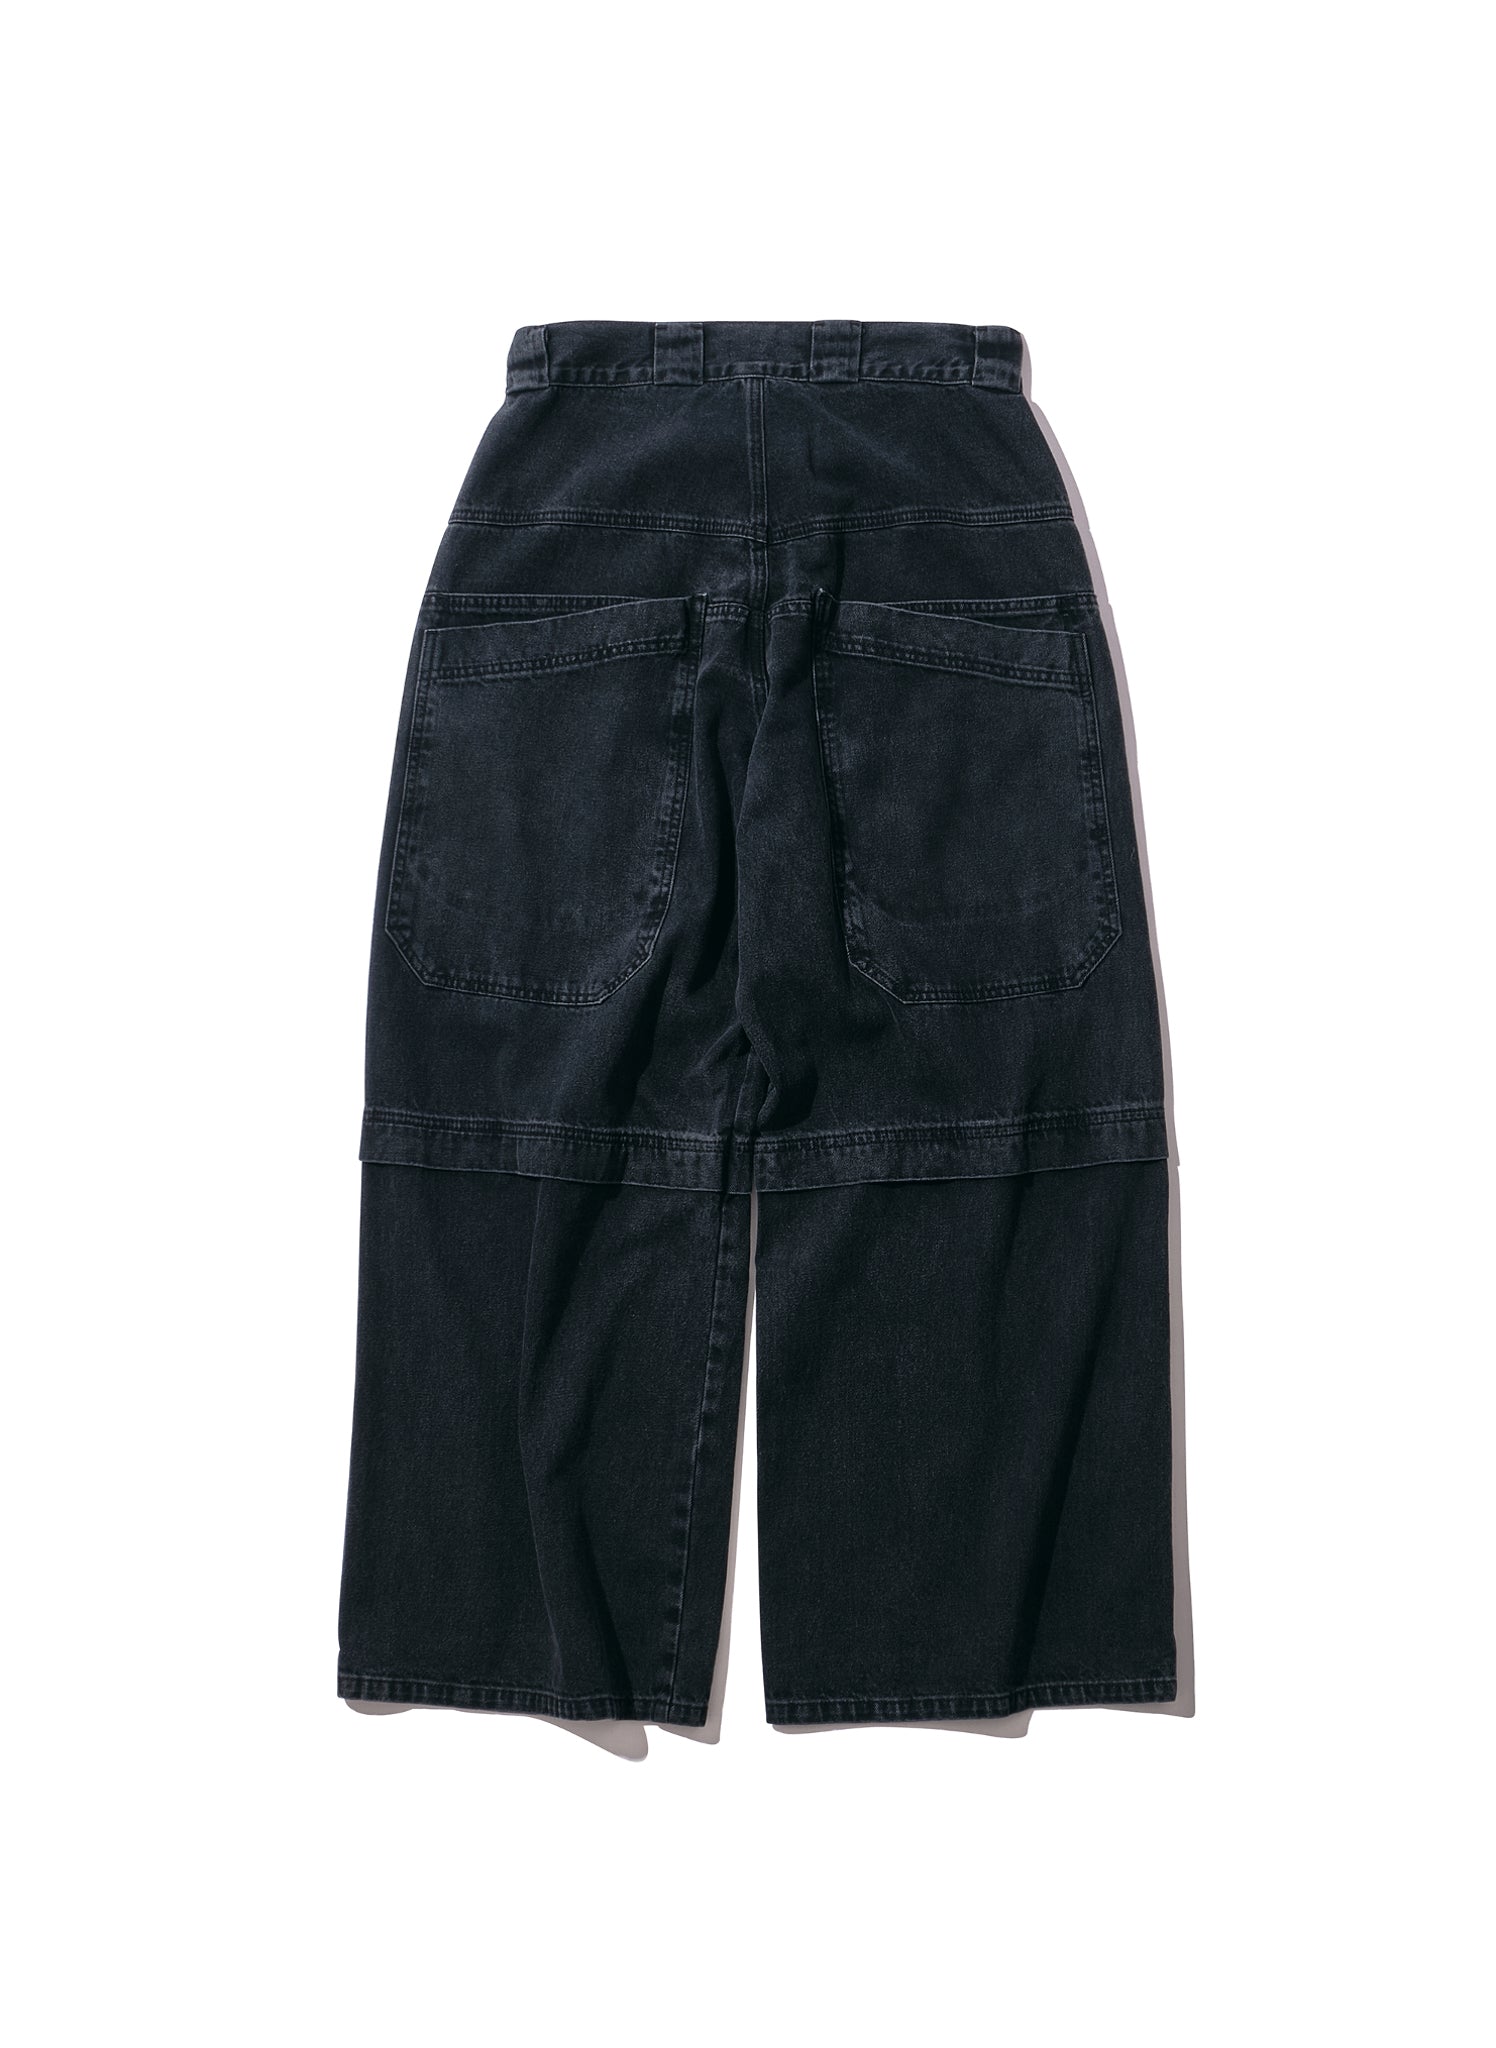 WILLY CHAVARRIA / DENIM LAYERED PANTS WASHED BLACK